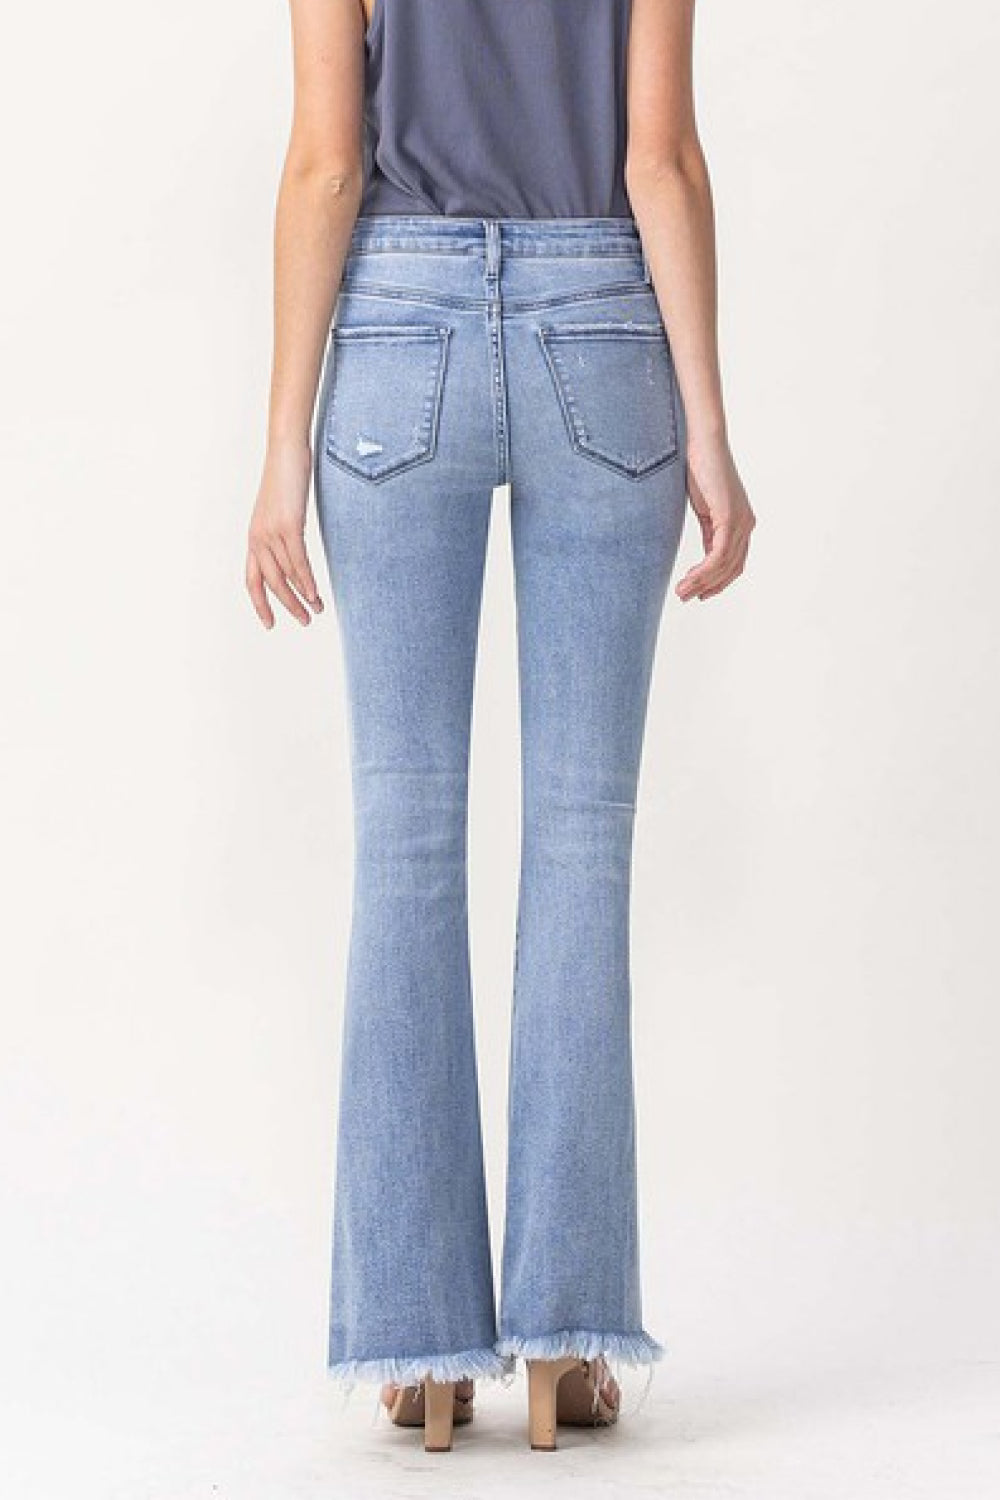 Chic High Rise Fray Flare Jeans ( 24 - 22W )